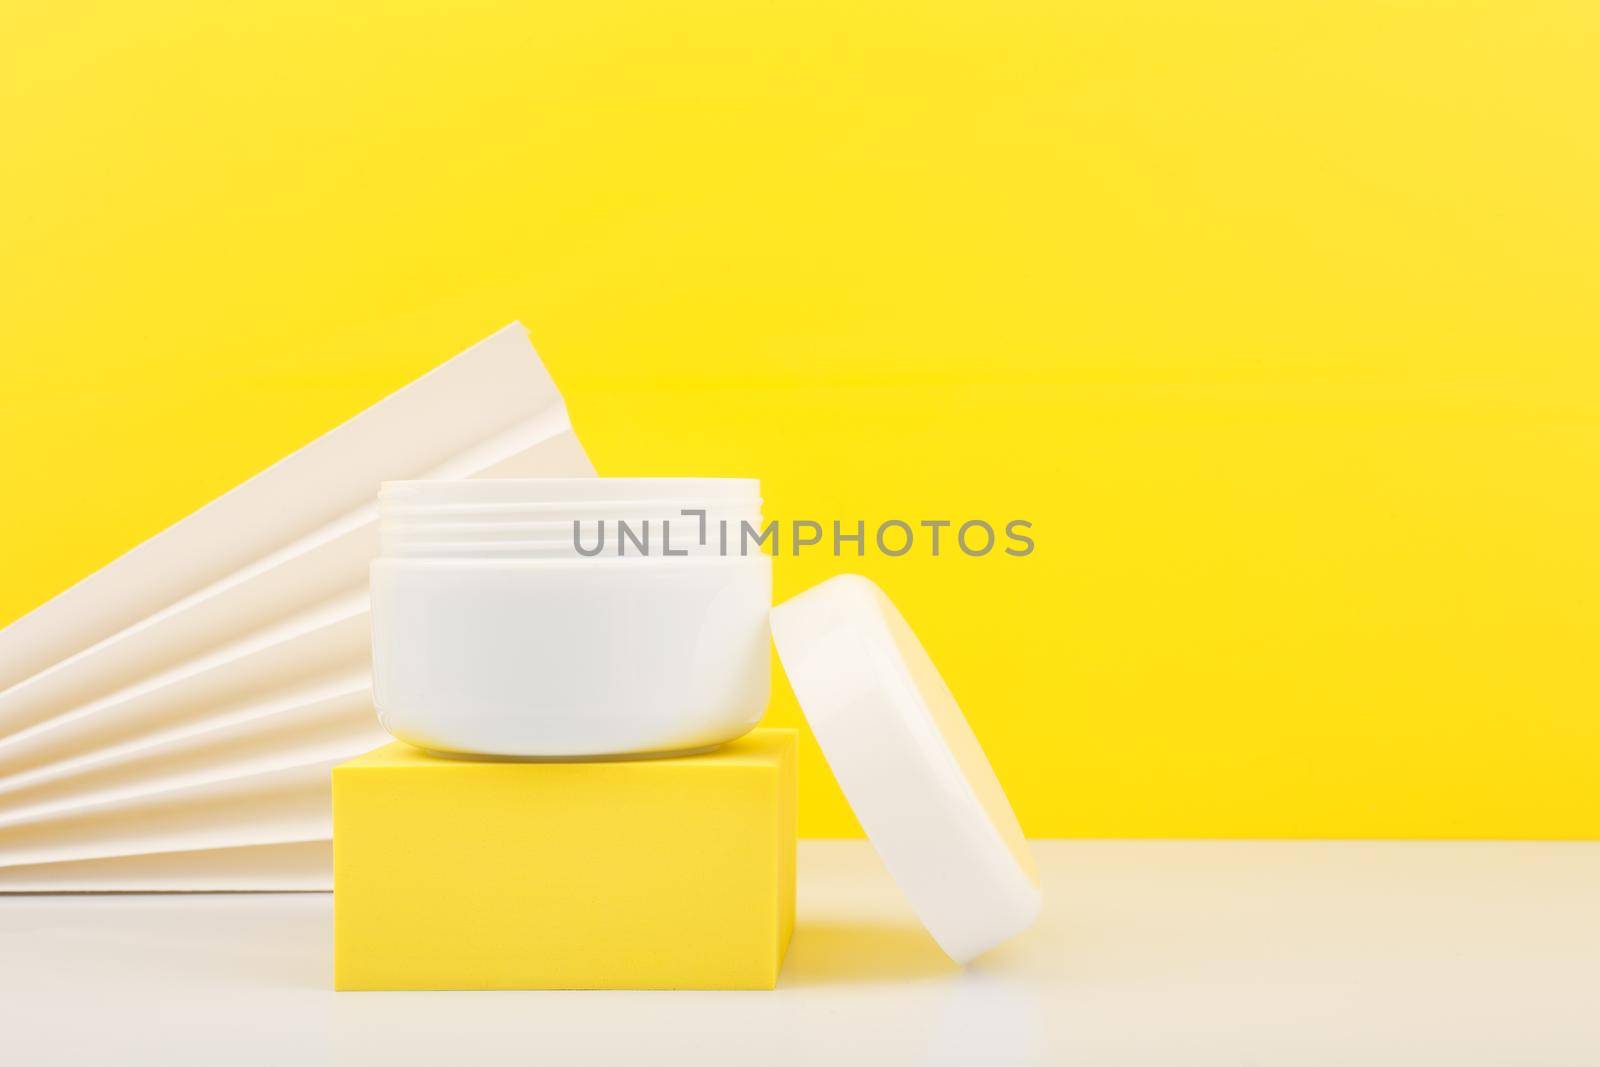 White opened cosmetic jar on yellow podium against yellow background decorated with white waver. Concept of beauty products and skin care